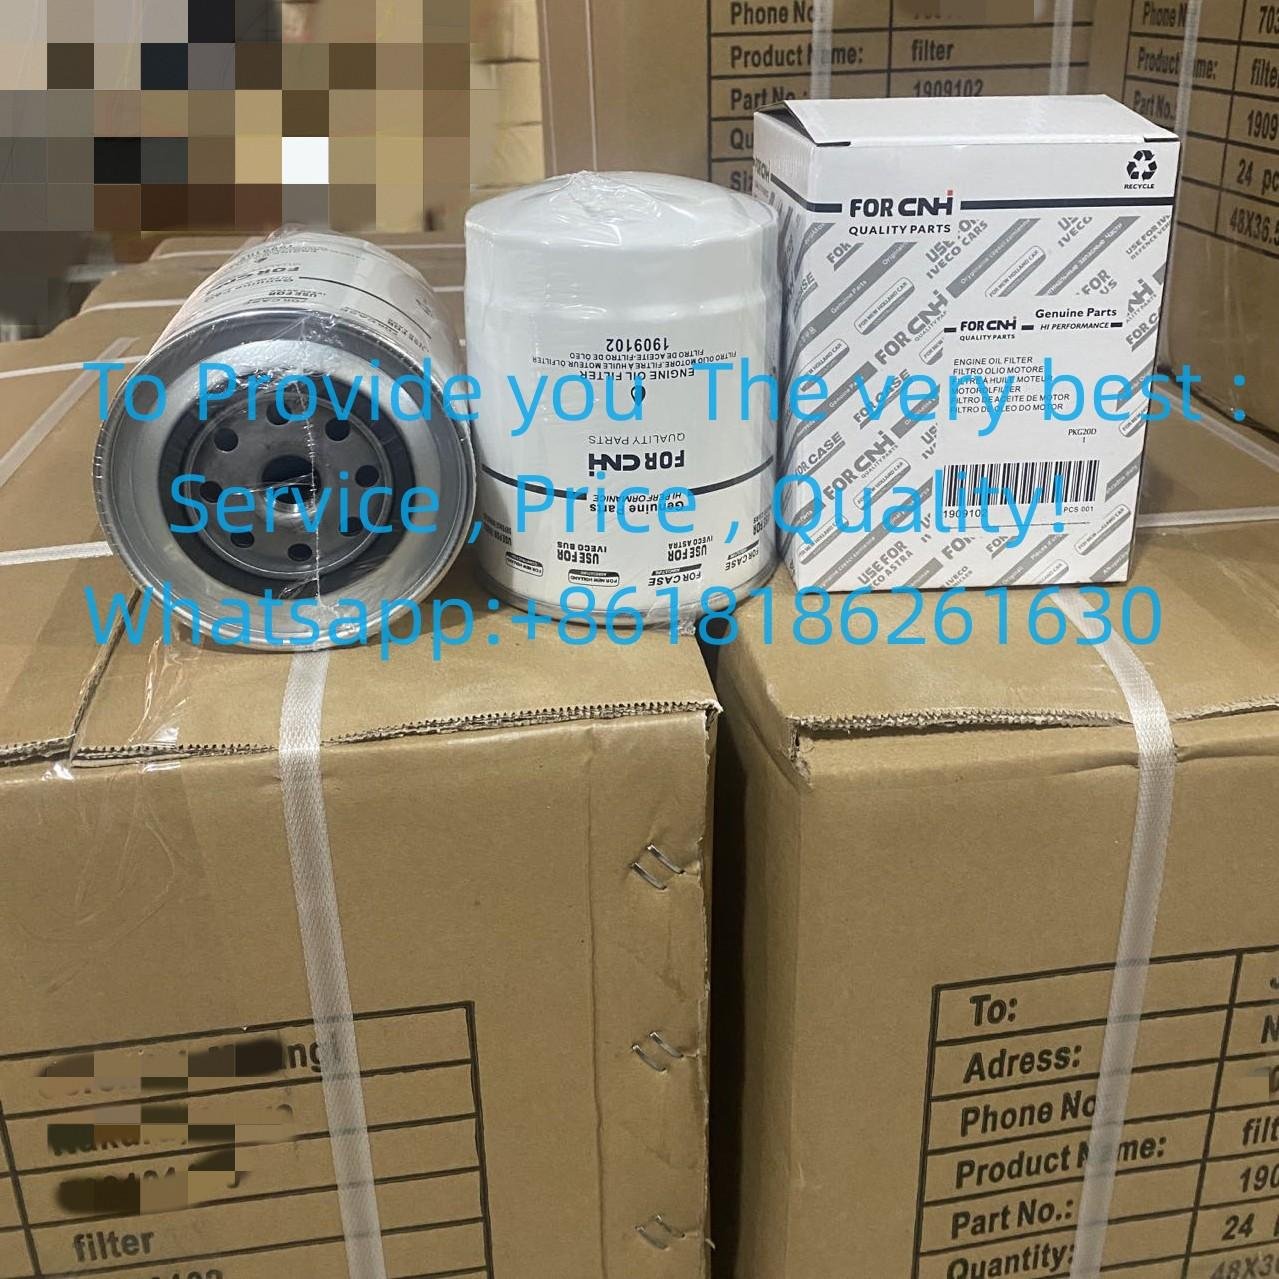 1909102 84221215  BT267 2654392 74513411 4135600 for New Holland Oil Filter  